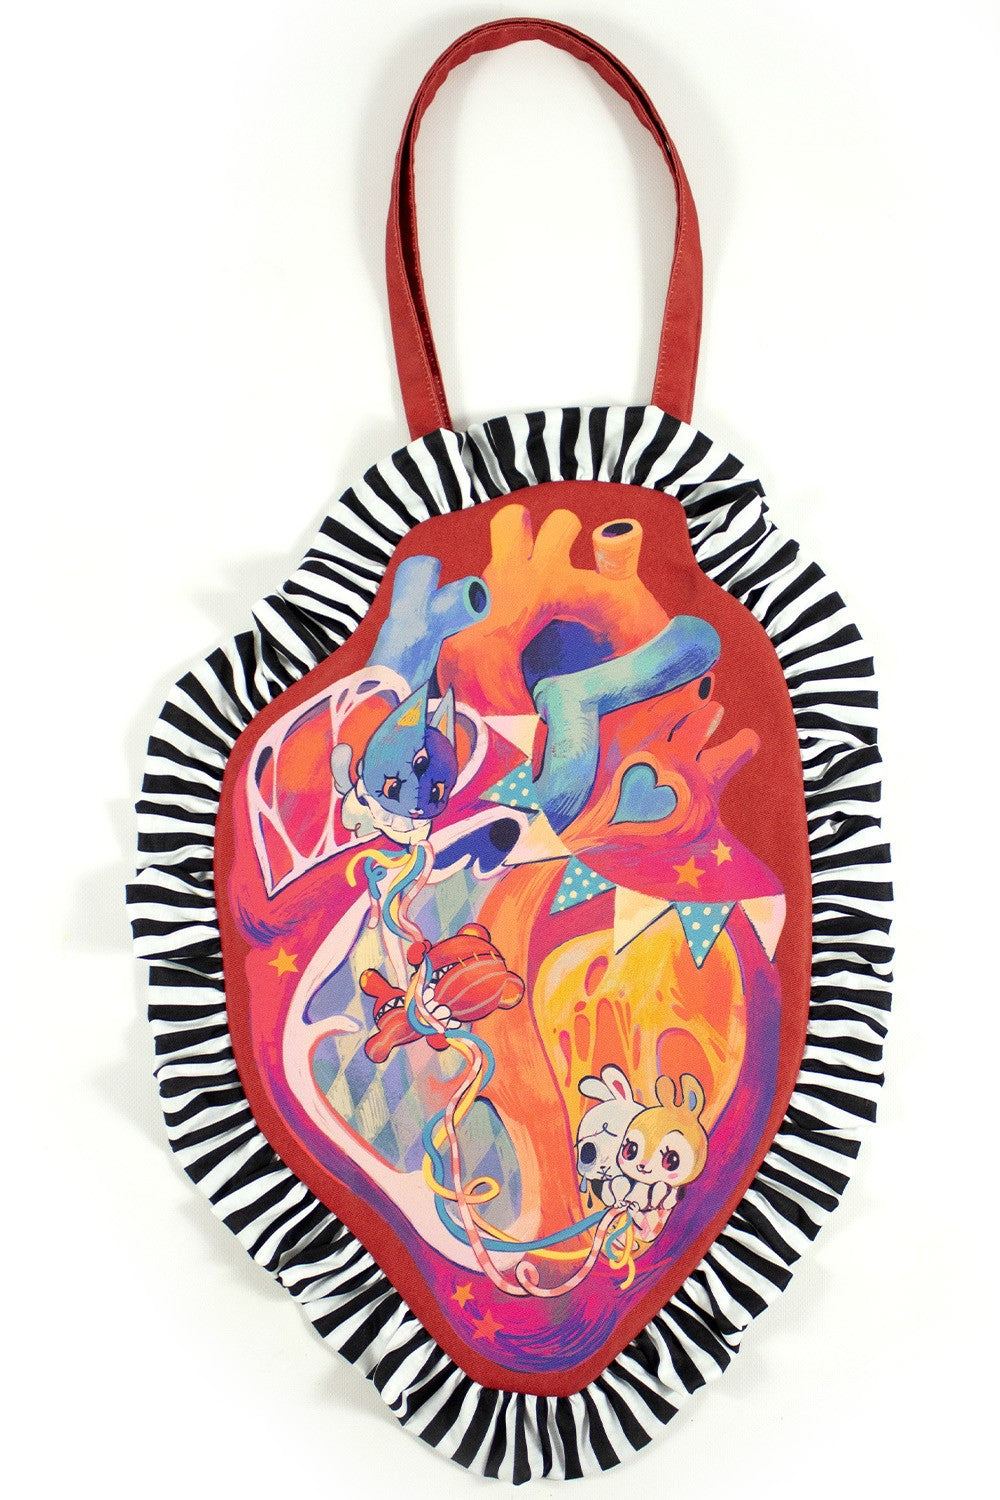 Twisted Circus Heart Totebag